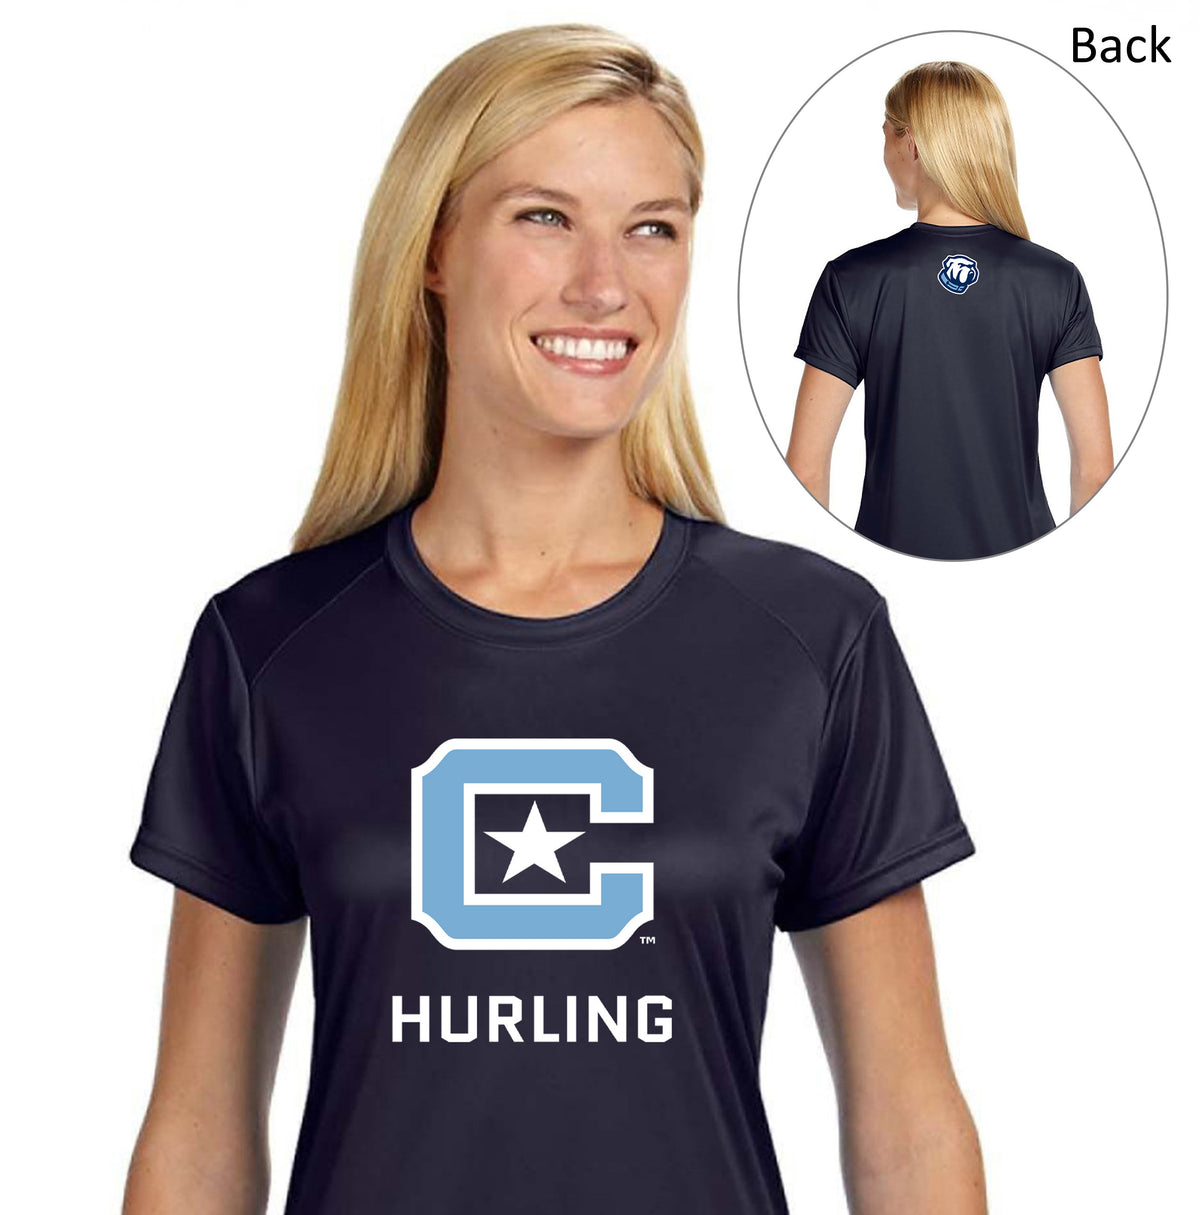 The Citadel, Club Sports - Hurling, A4 Ladies' Cooling Performance T-Shirt- Navy